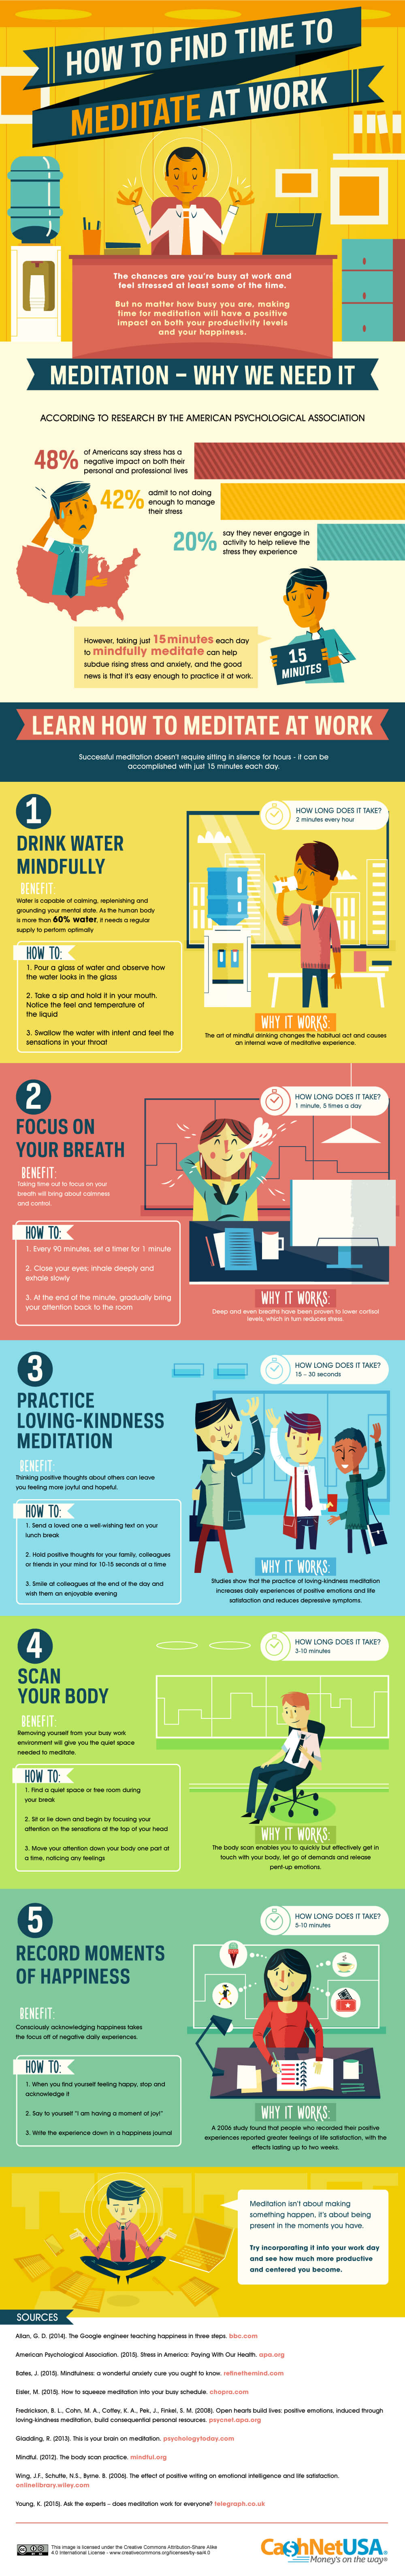 An infographic showing five tips for meditating at work.